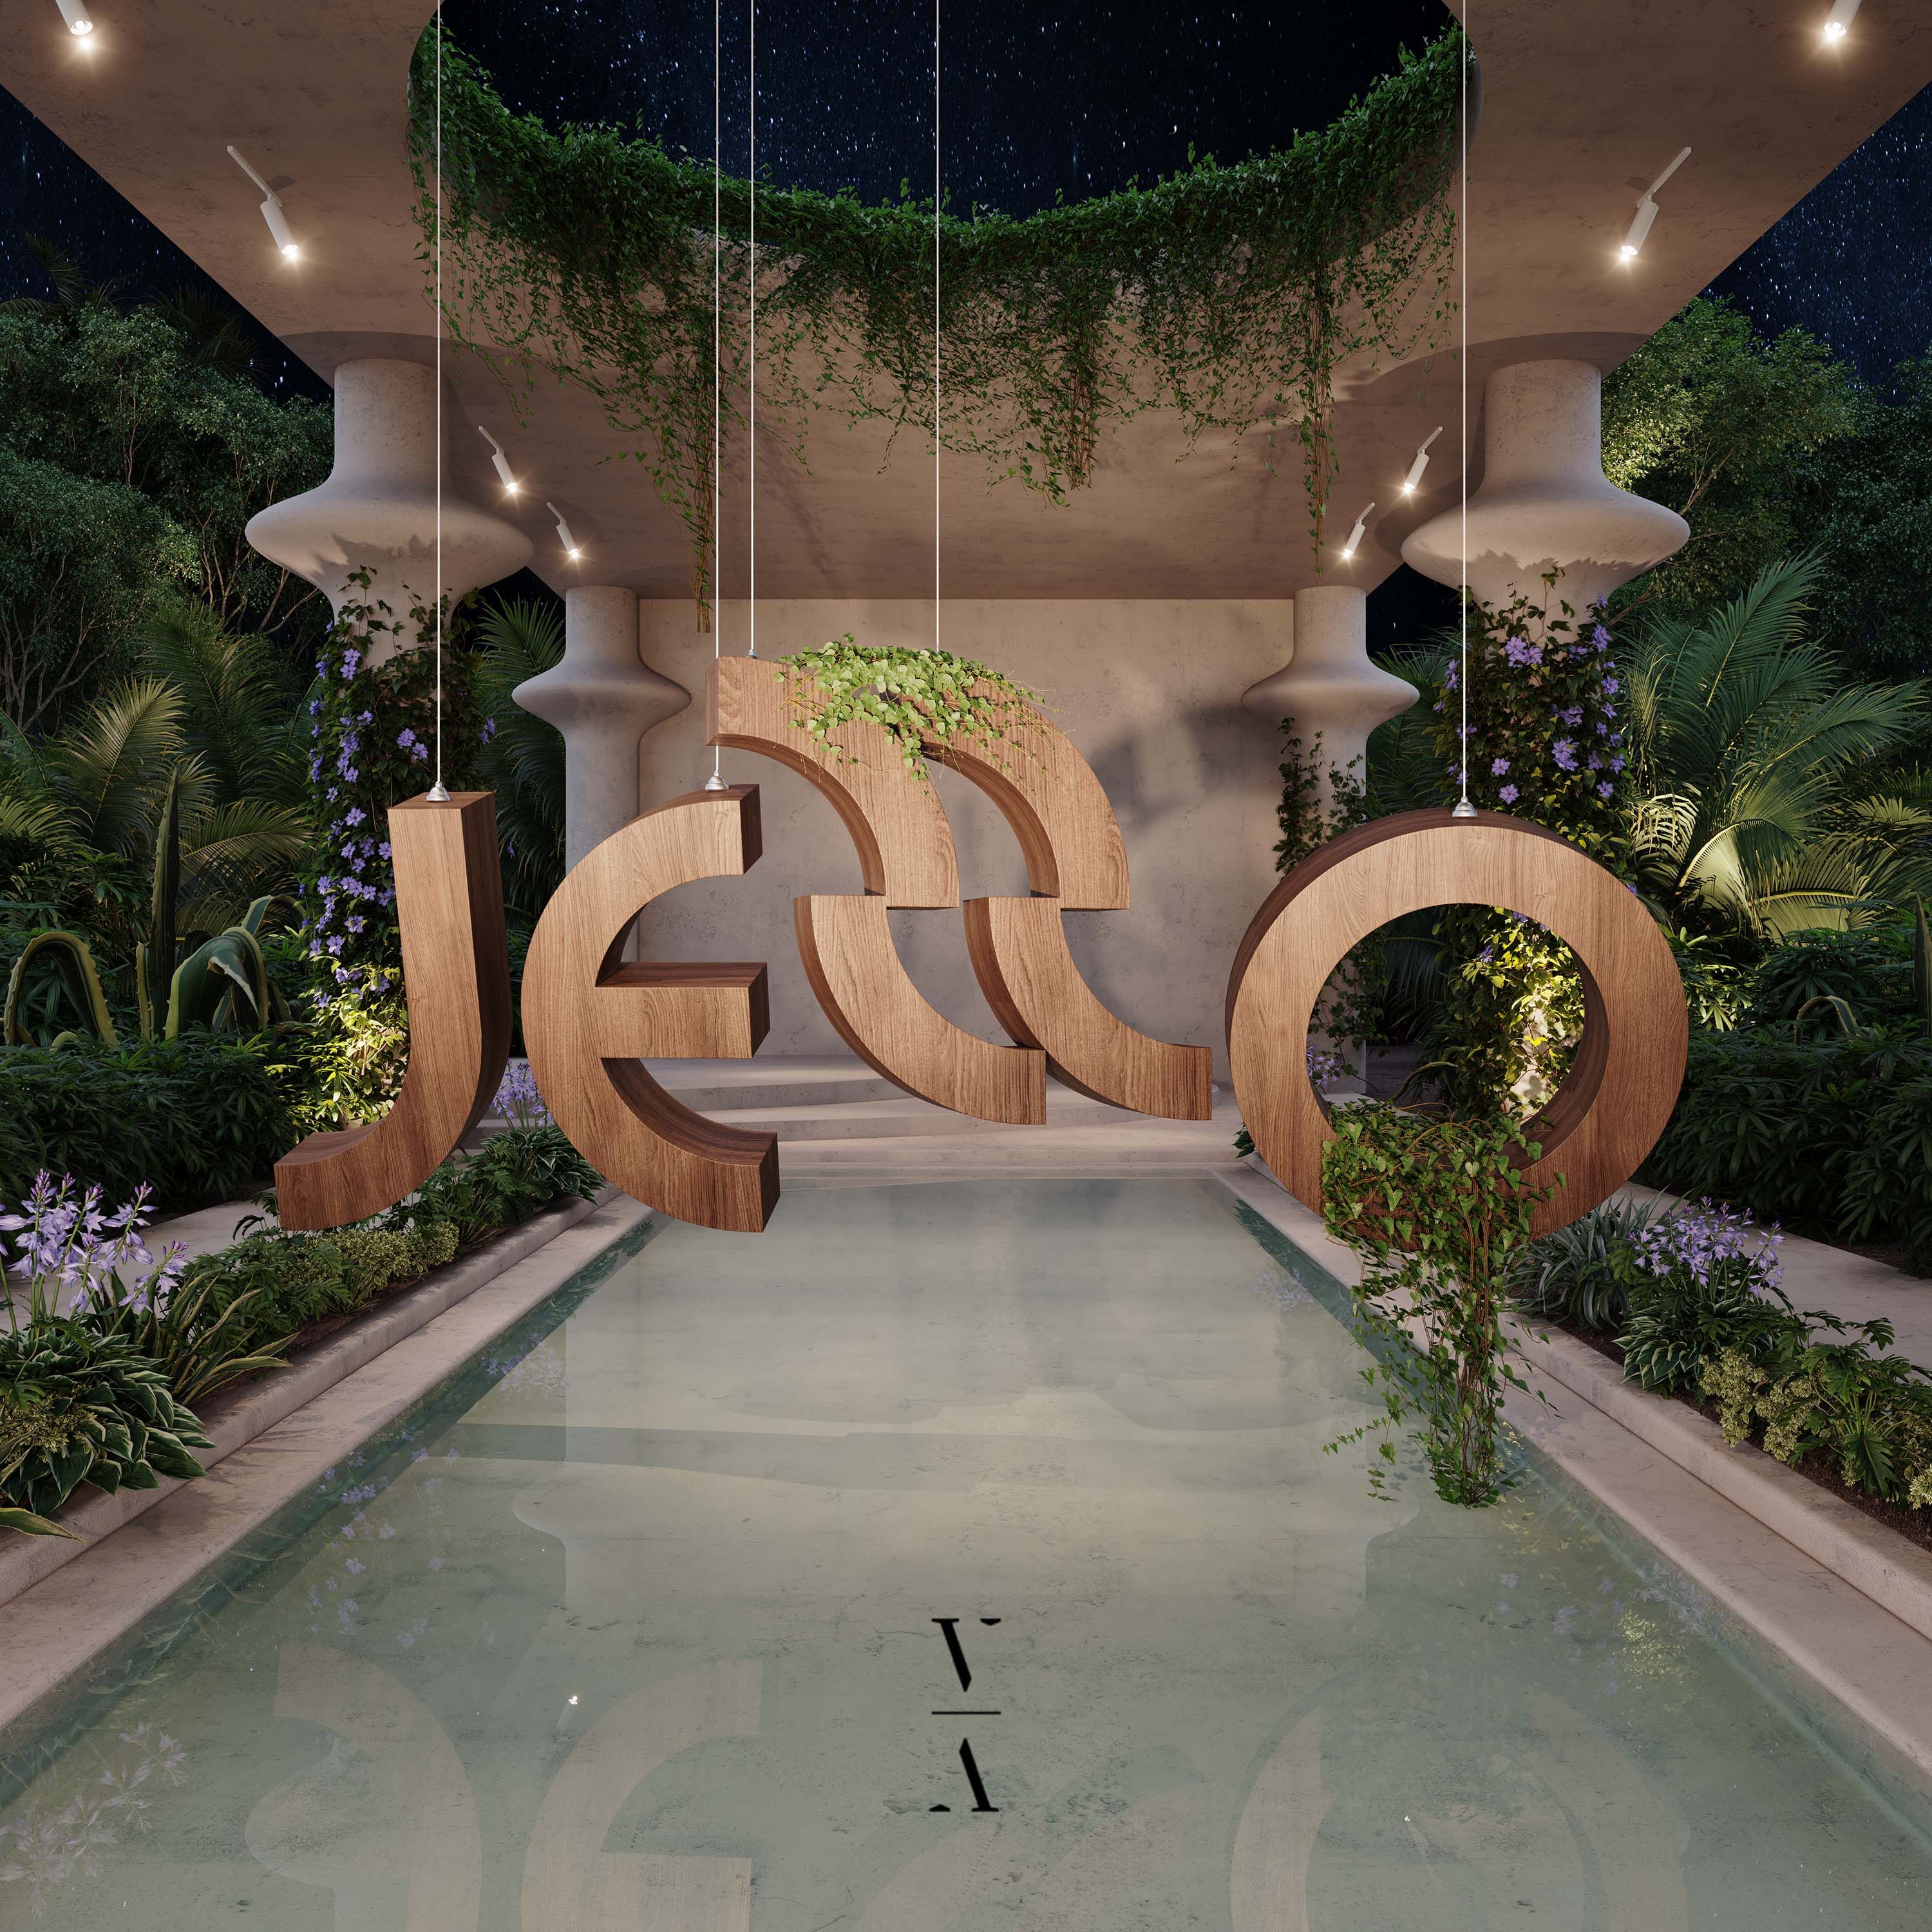 Download Jerro - Lost for Words feat. Panama (Frost Remix)